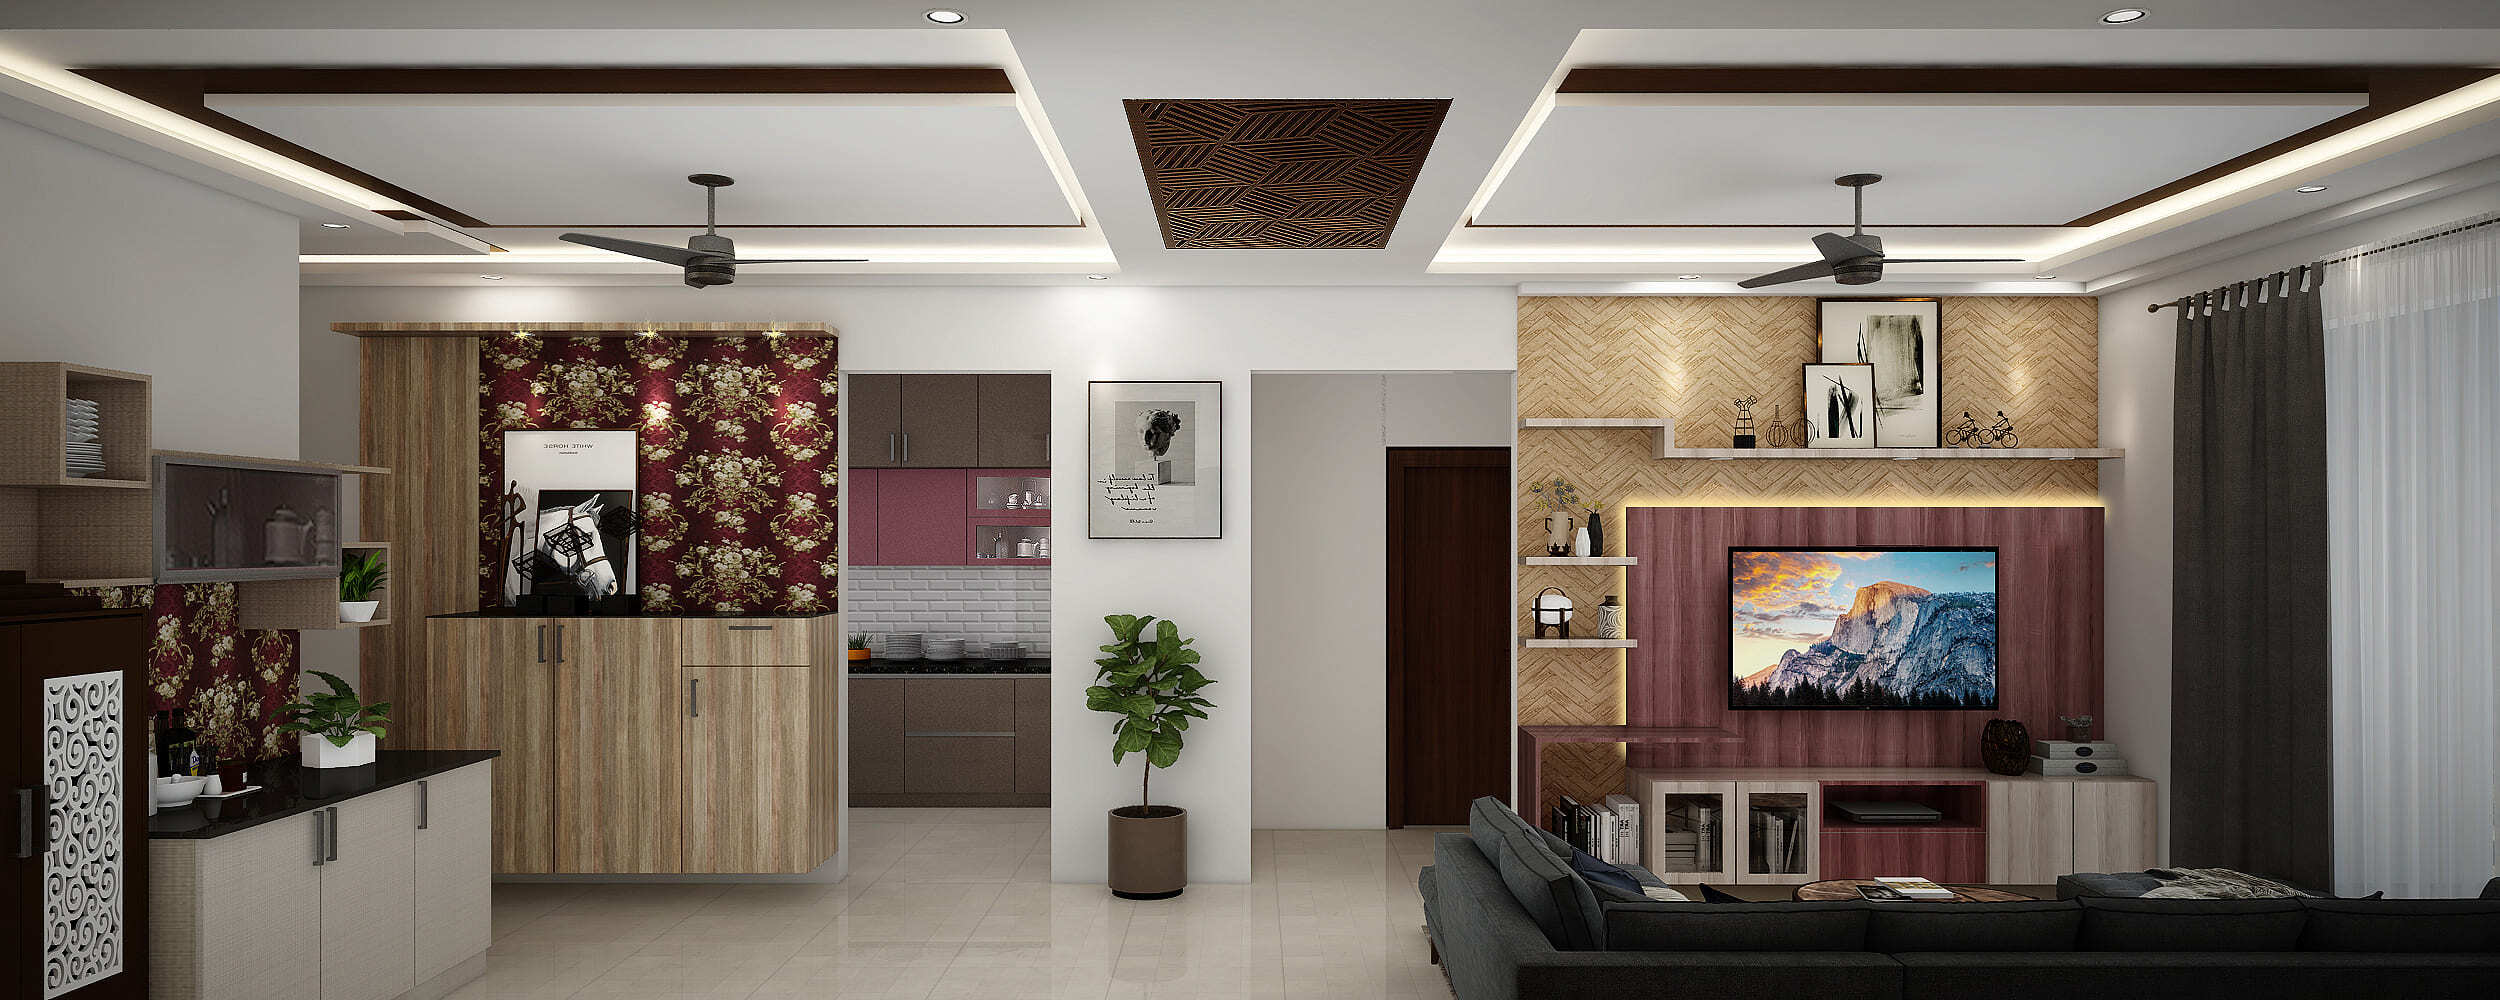 Lighting Ideas For Living Room Without False Ceiling